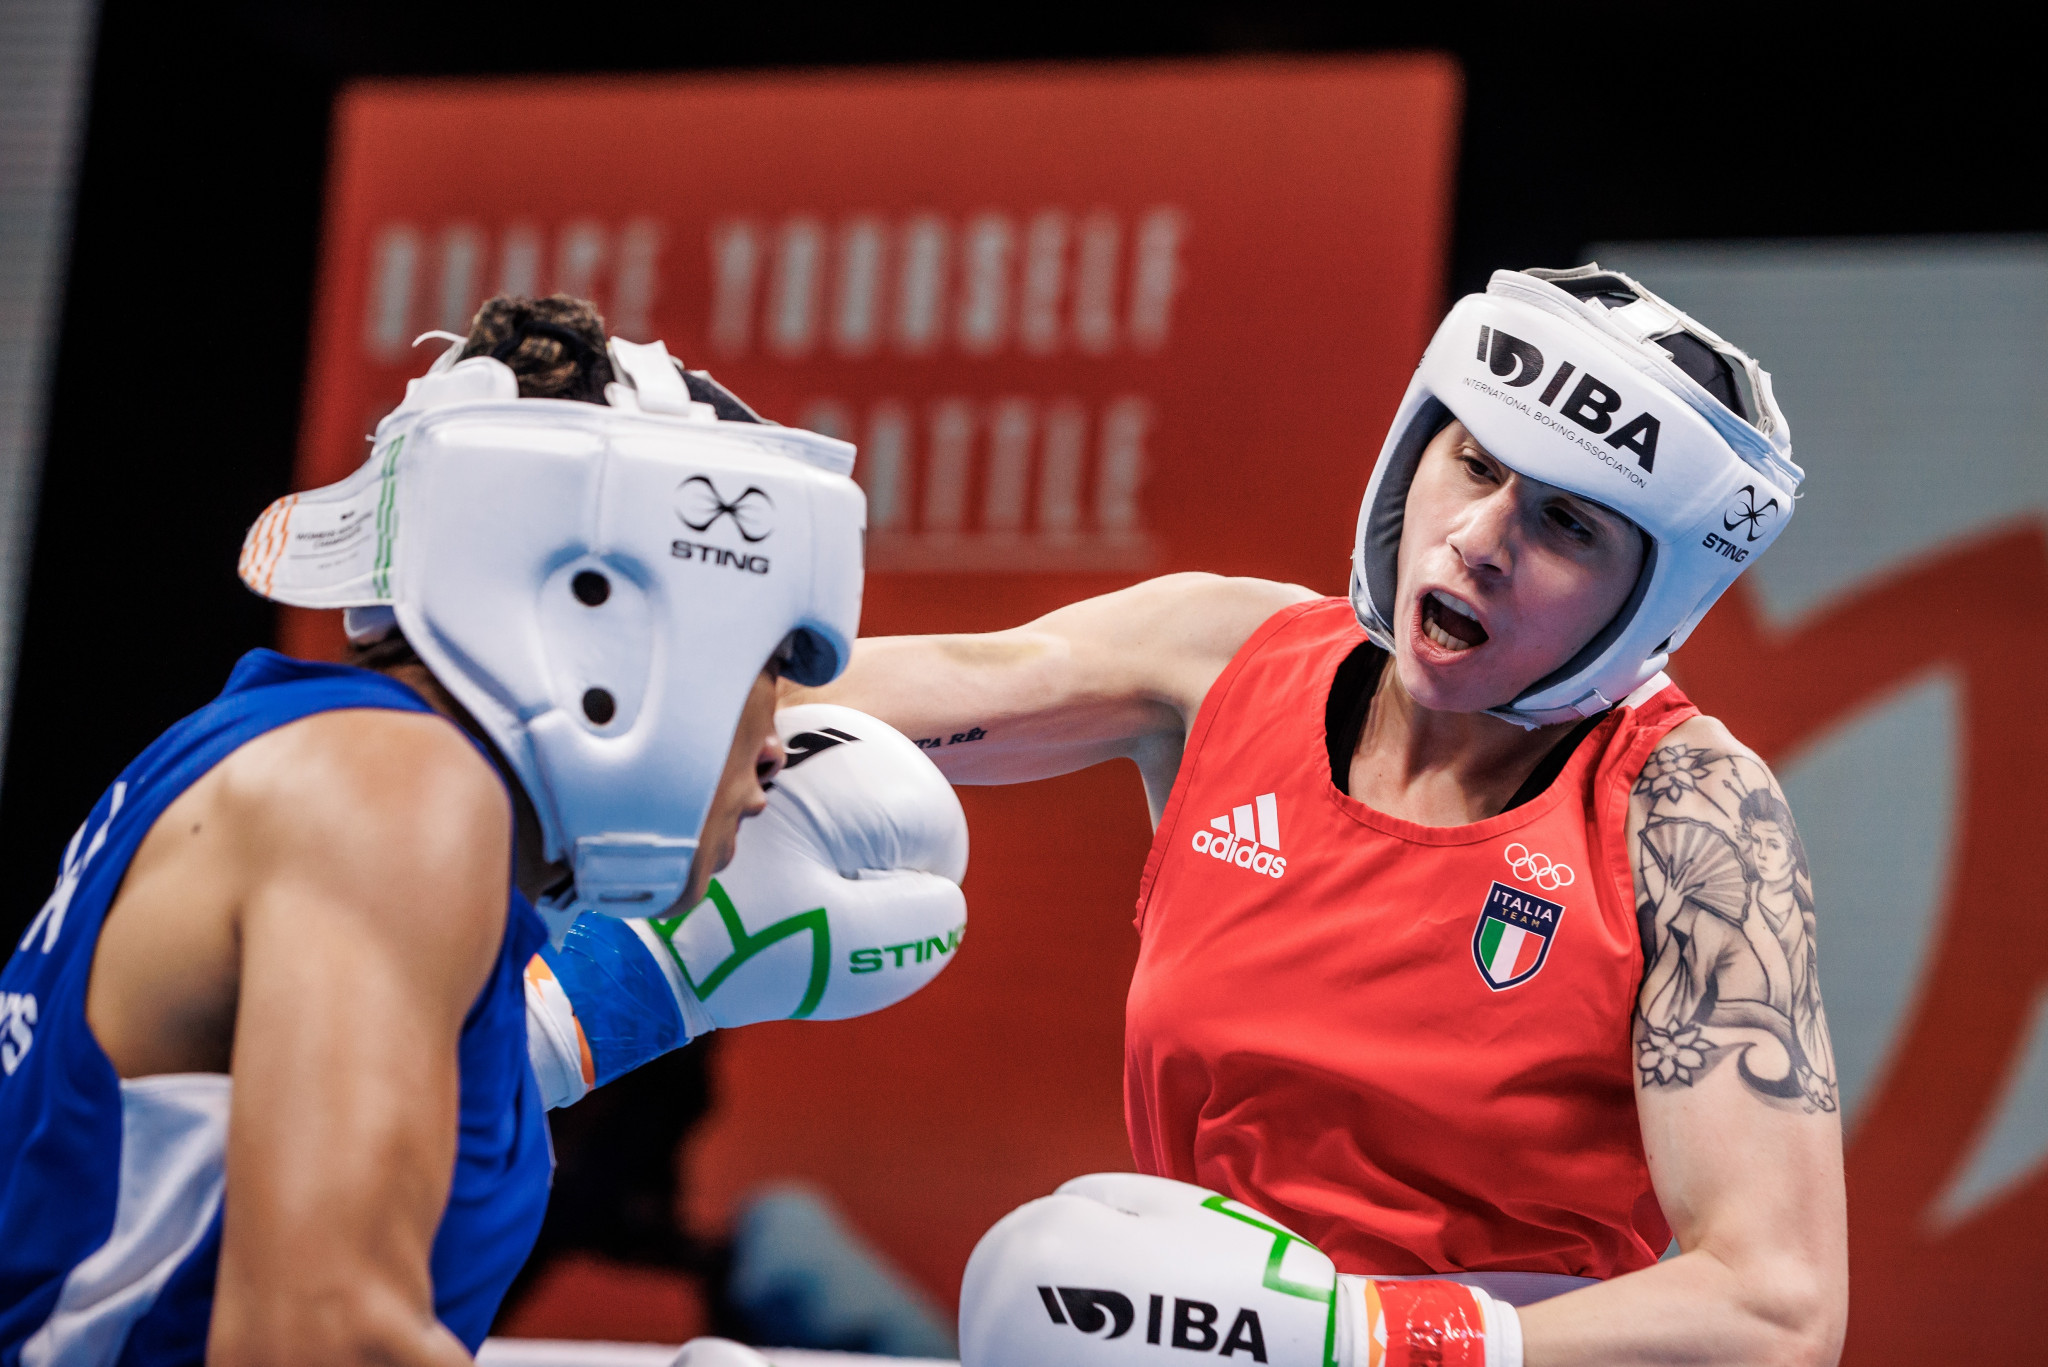 Olympic bronze medallist Irma Testa of Italy overcame the challenge of Leilany Noshbet Reyes Moreno of Guyana in a closely-fought battle ©IBA